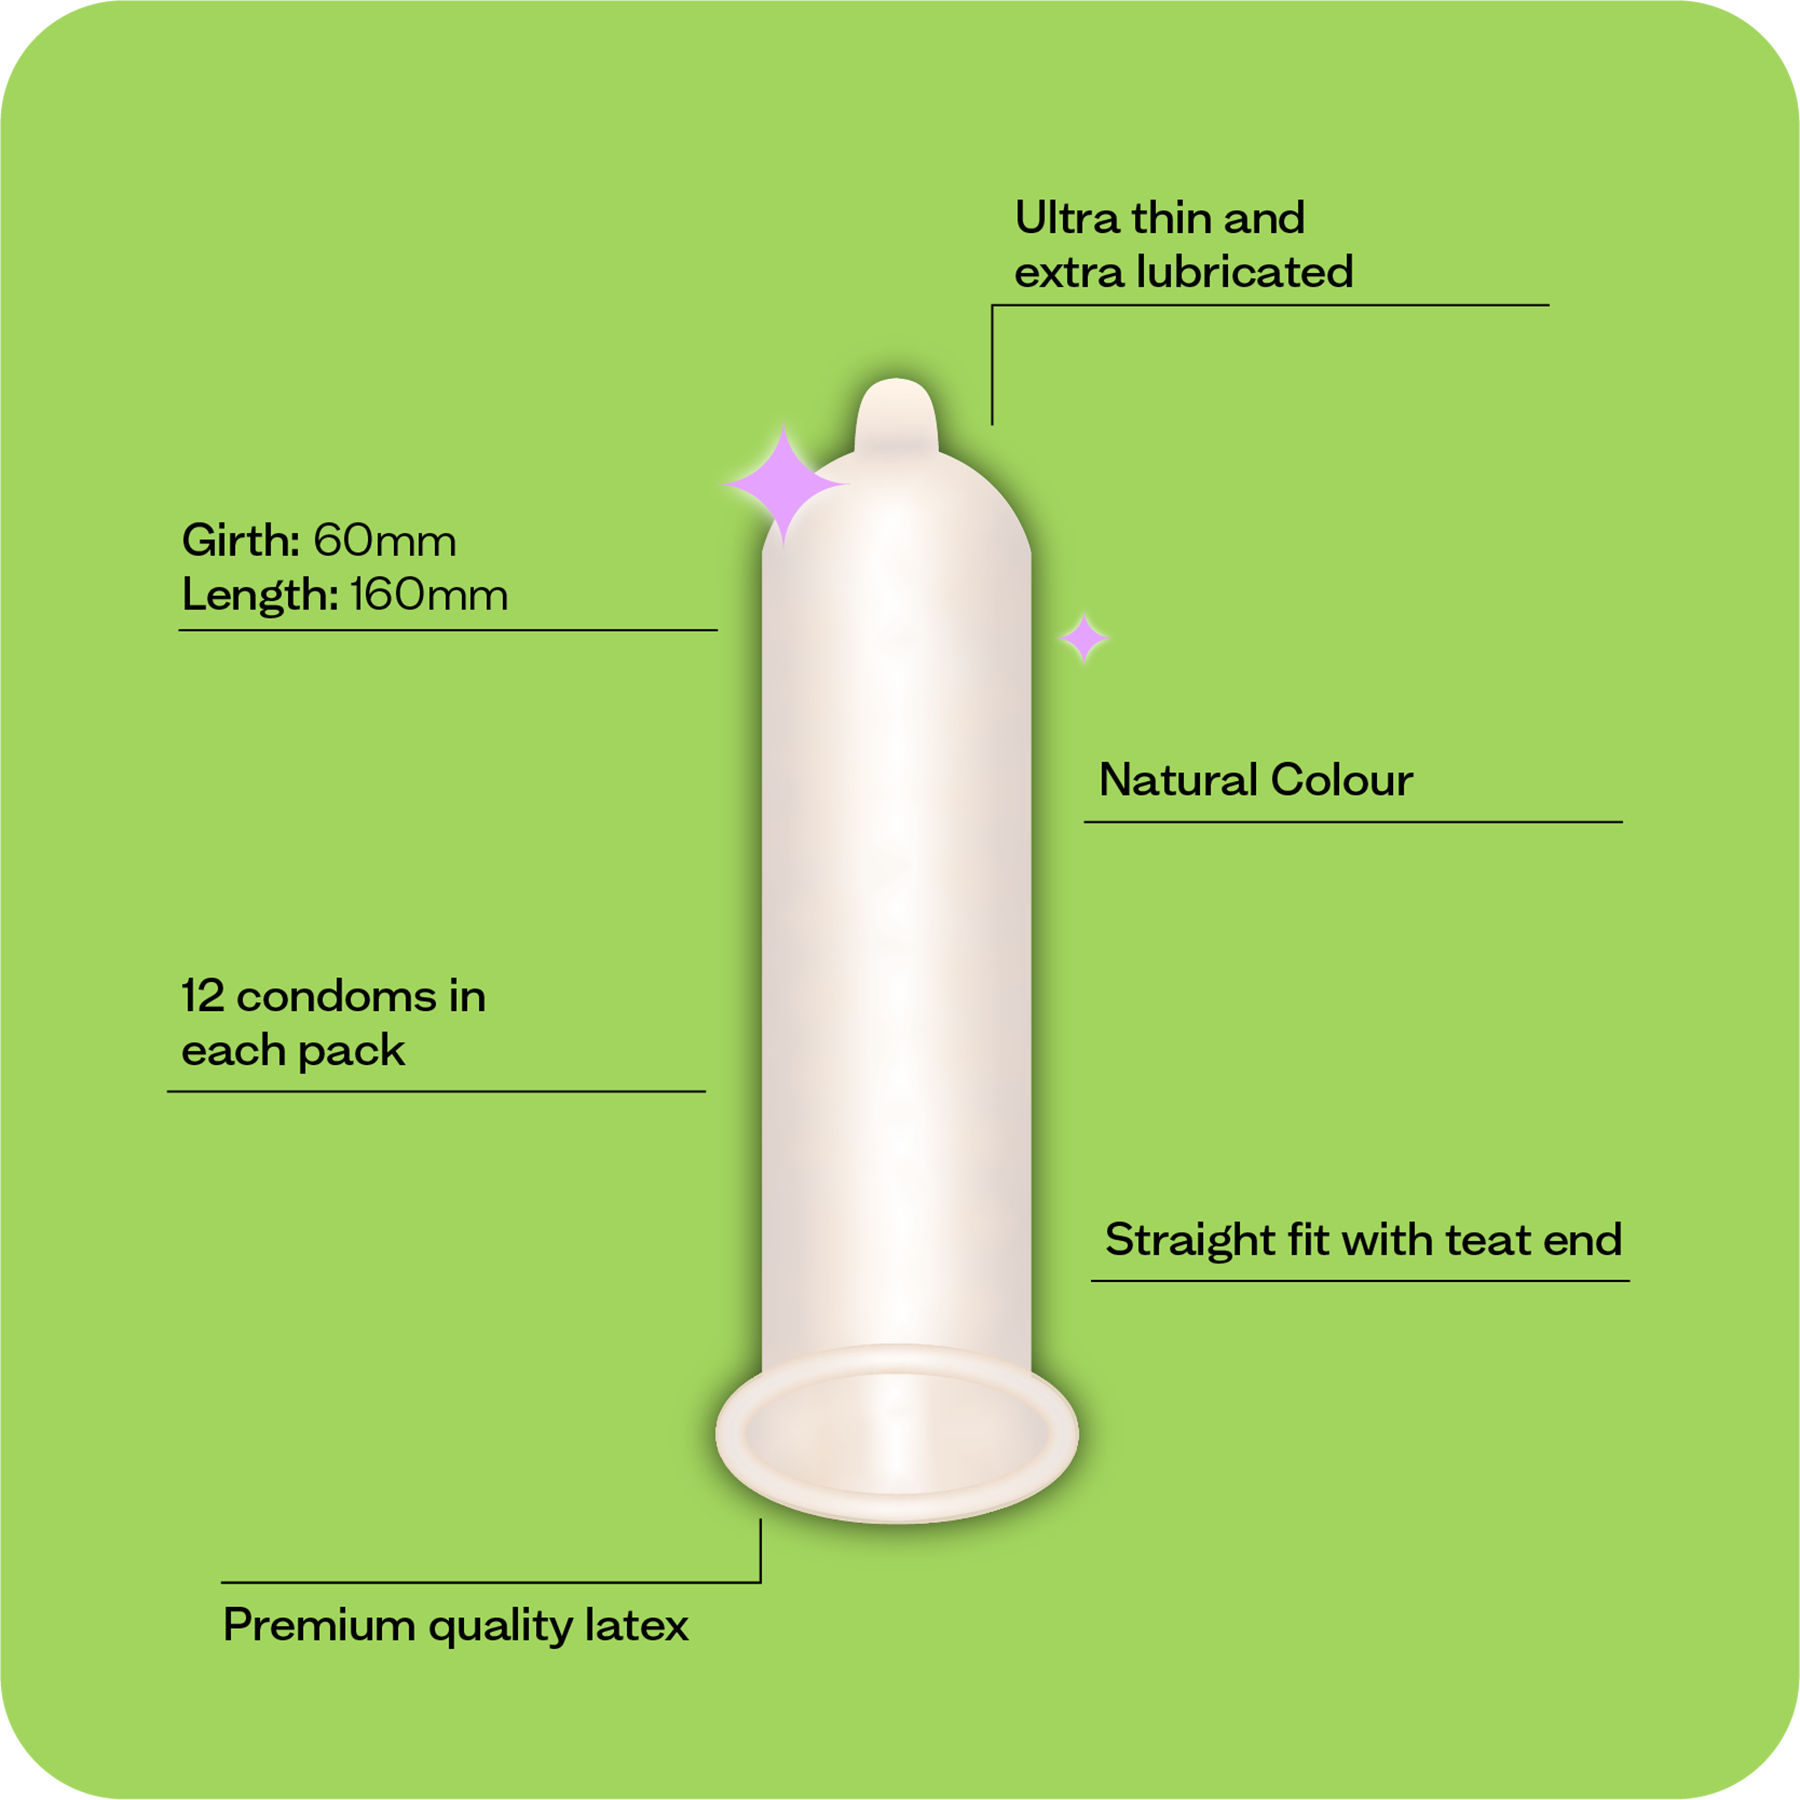 Illustration detailing the anatomy of Moments Ultra Thin Extra Large condom